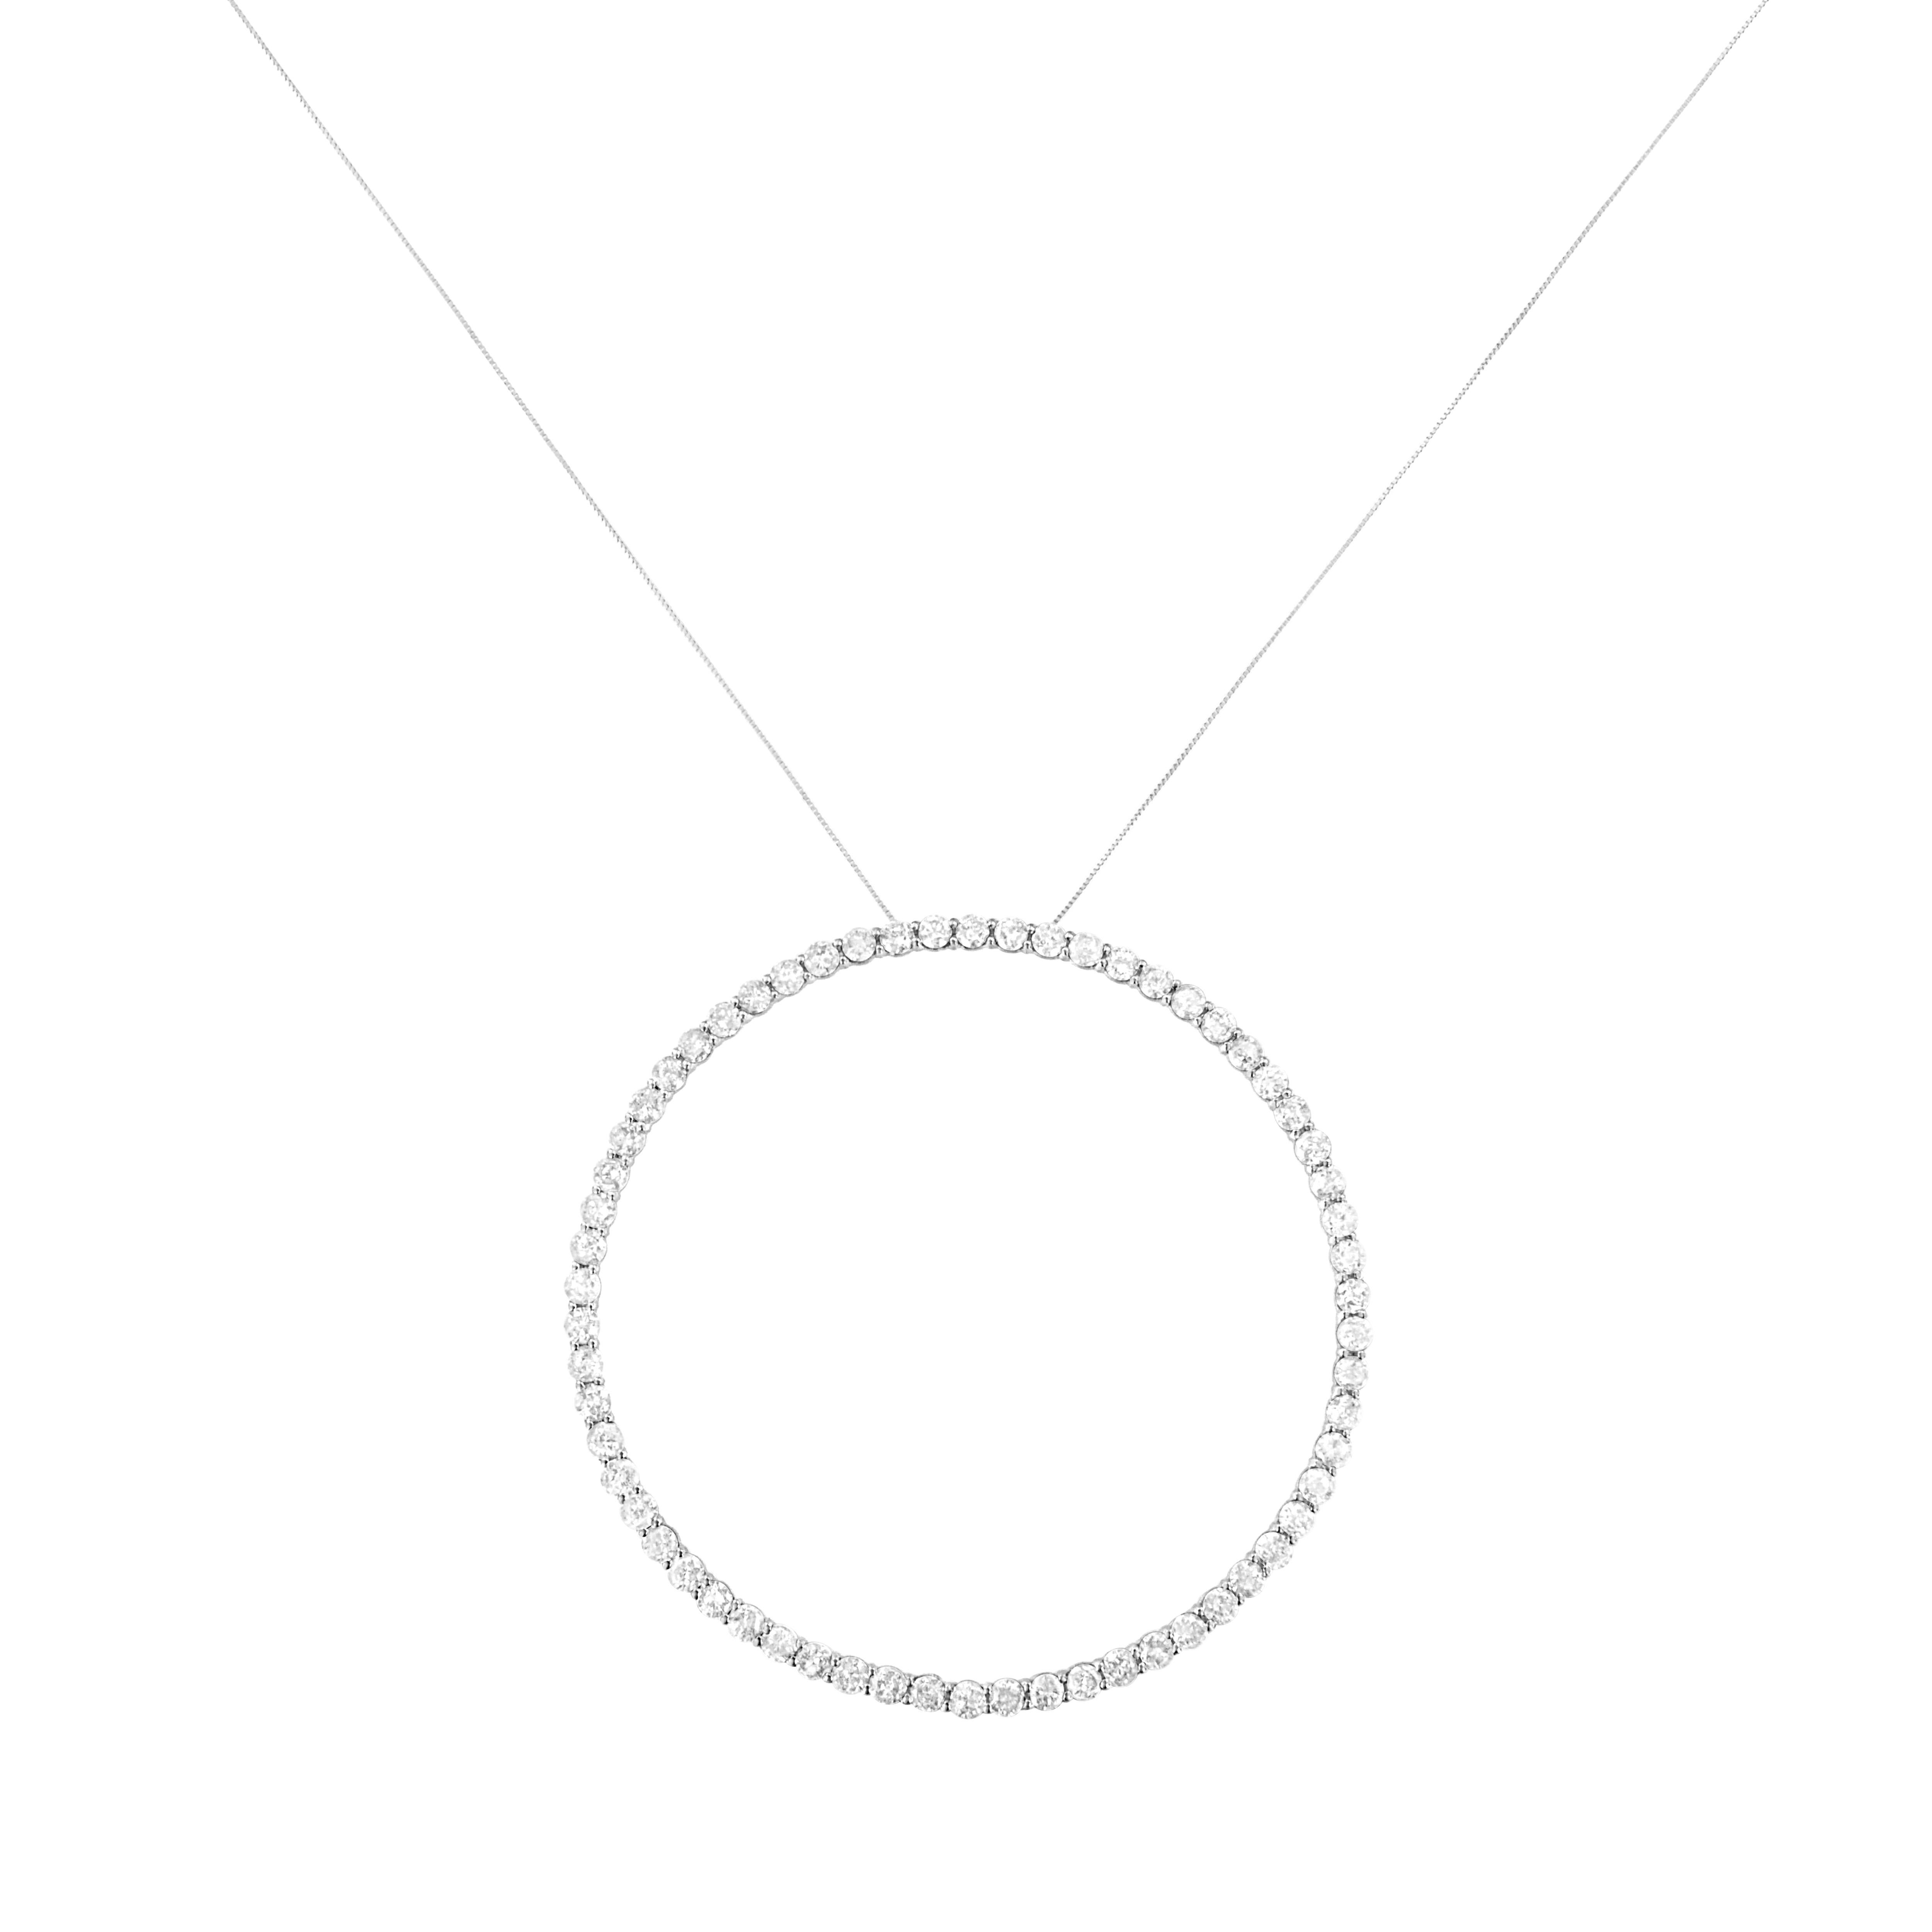 You can't go wrong with this simple and delicate circle pendant necklace. Crafted in cool .925 sterling silver, this pendant features 5 carats of natural diamonds. 62 glistening round cut diamonds line this open circle pendant that dangles from a